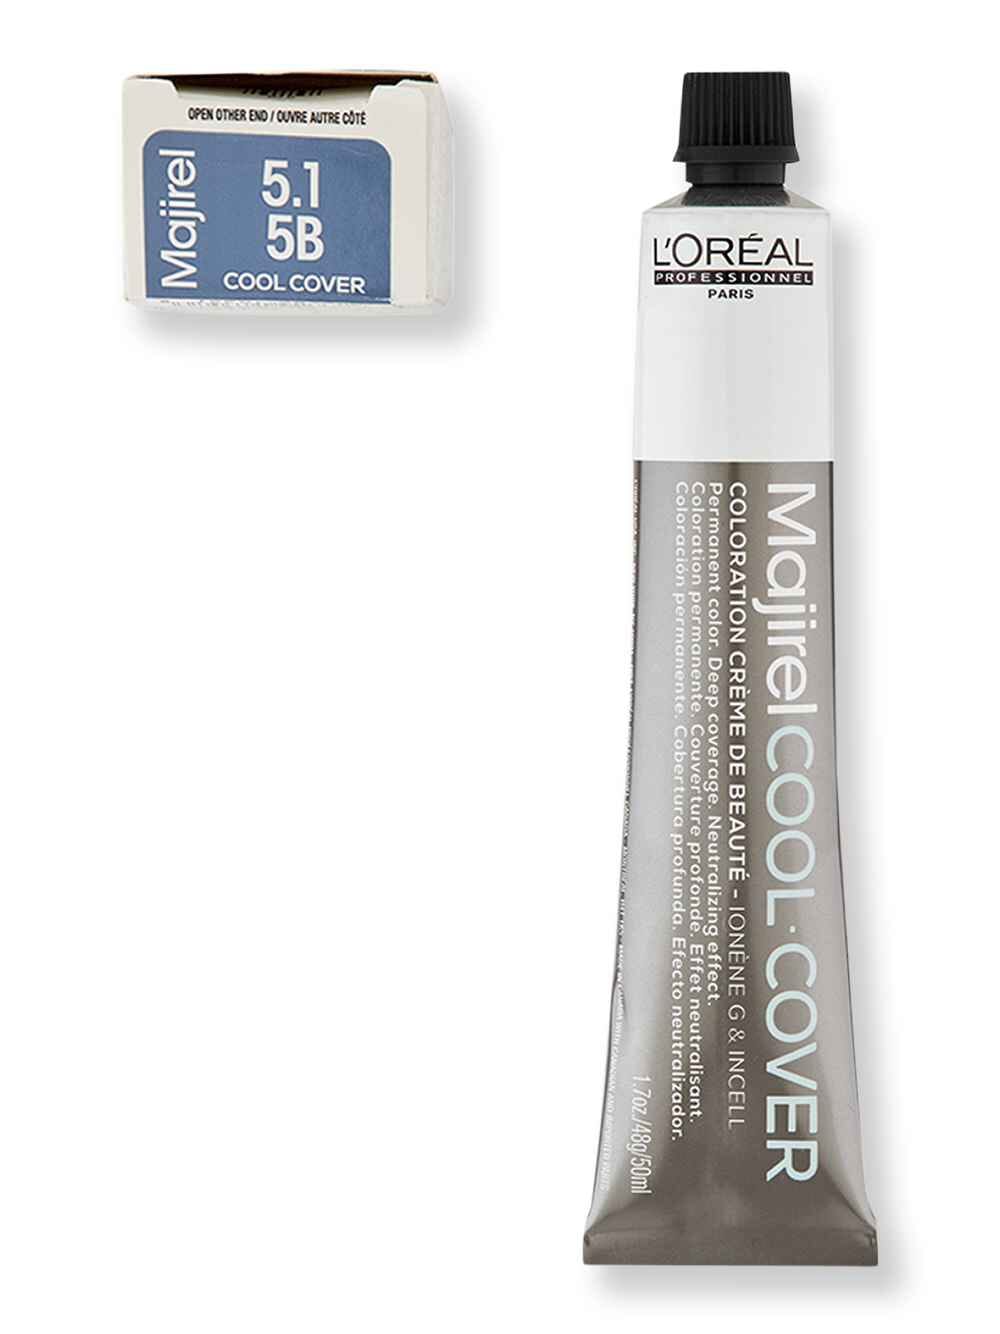 L'Oreal Professionnel L'Oreal Professionnel Majirel Cool Cover CC 5.1/5B Styling Treatments 